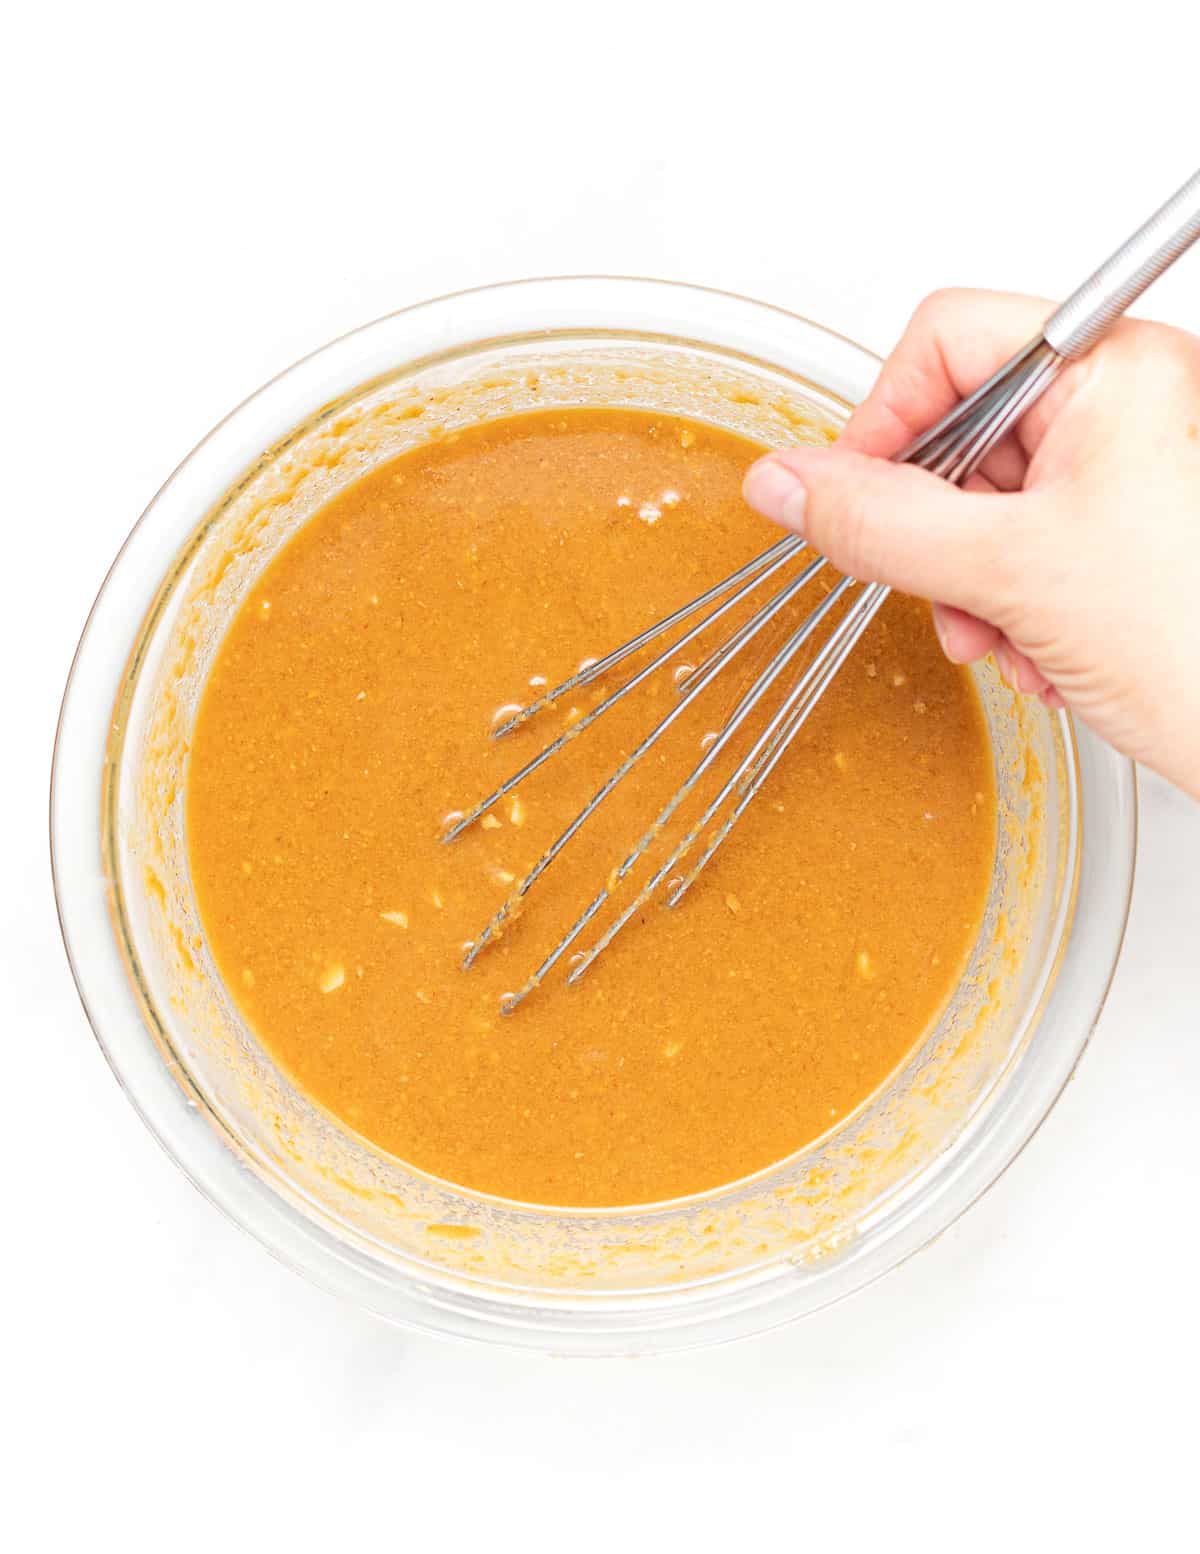 whisking sauce in a bowl